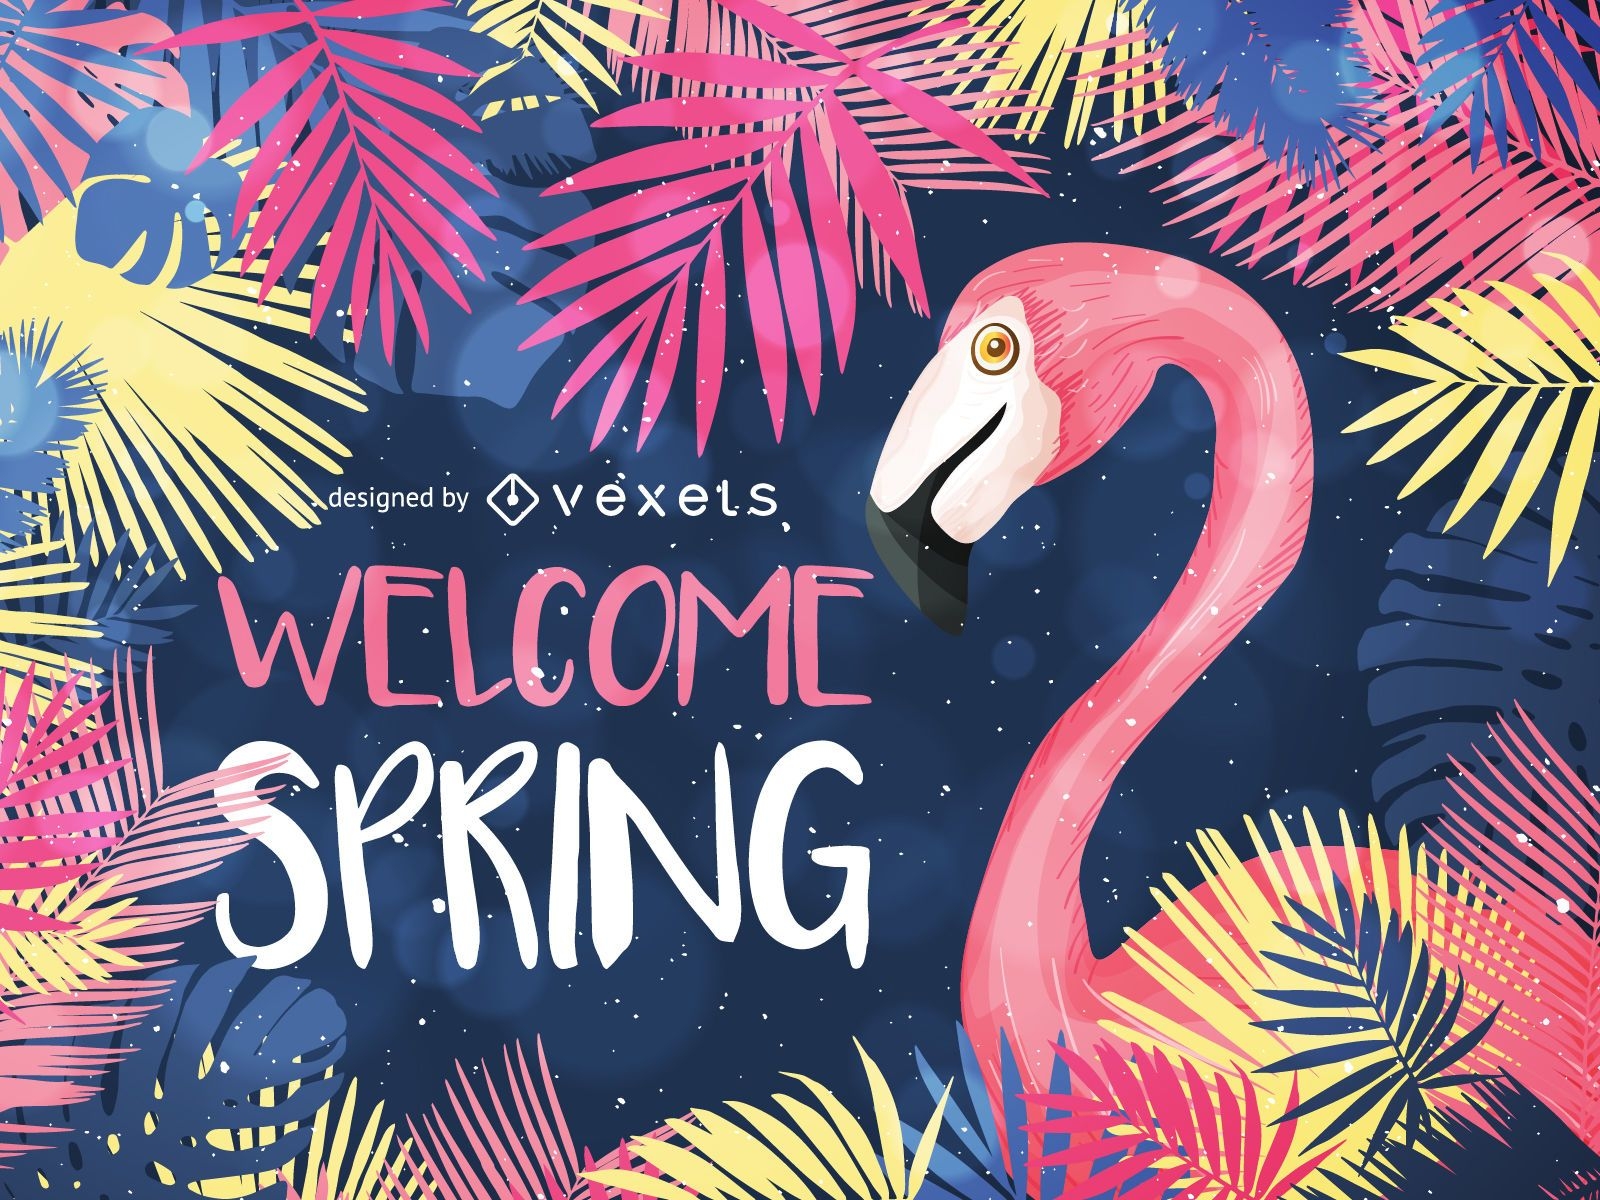 Welcome Spring design with illustrations